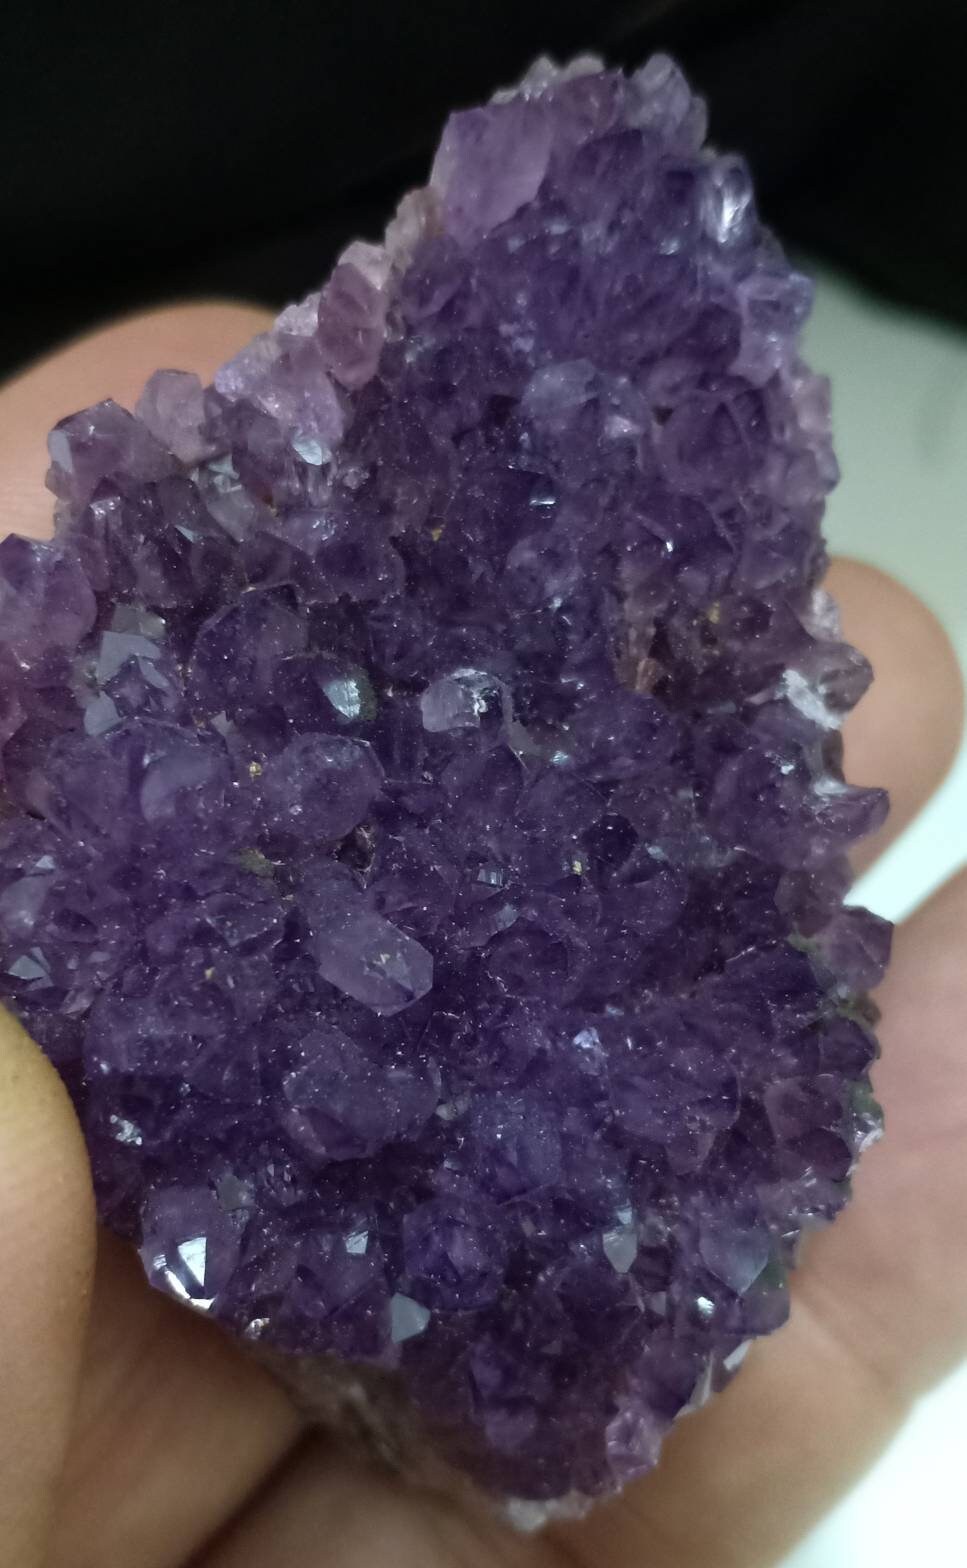 Single beautiful Drusy Amethyst crystals Cluster with beautiful purple color 68 grams